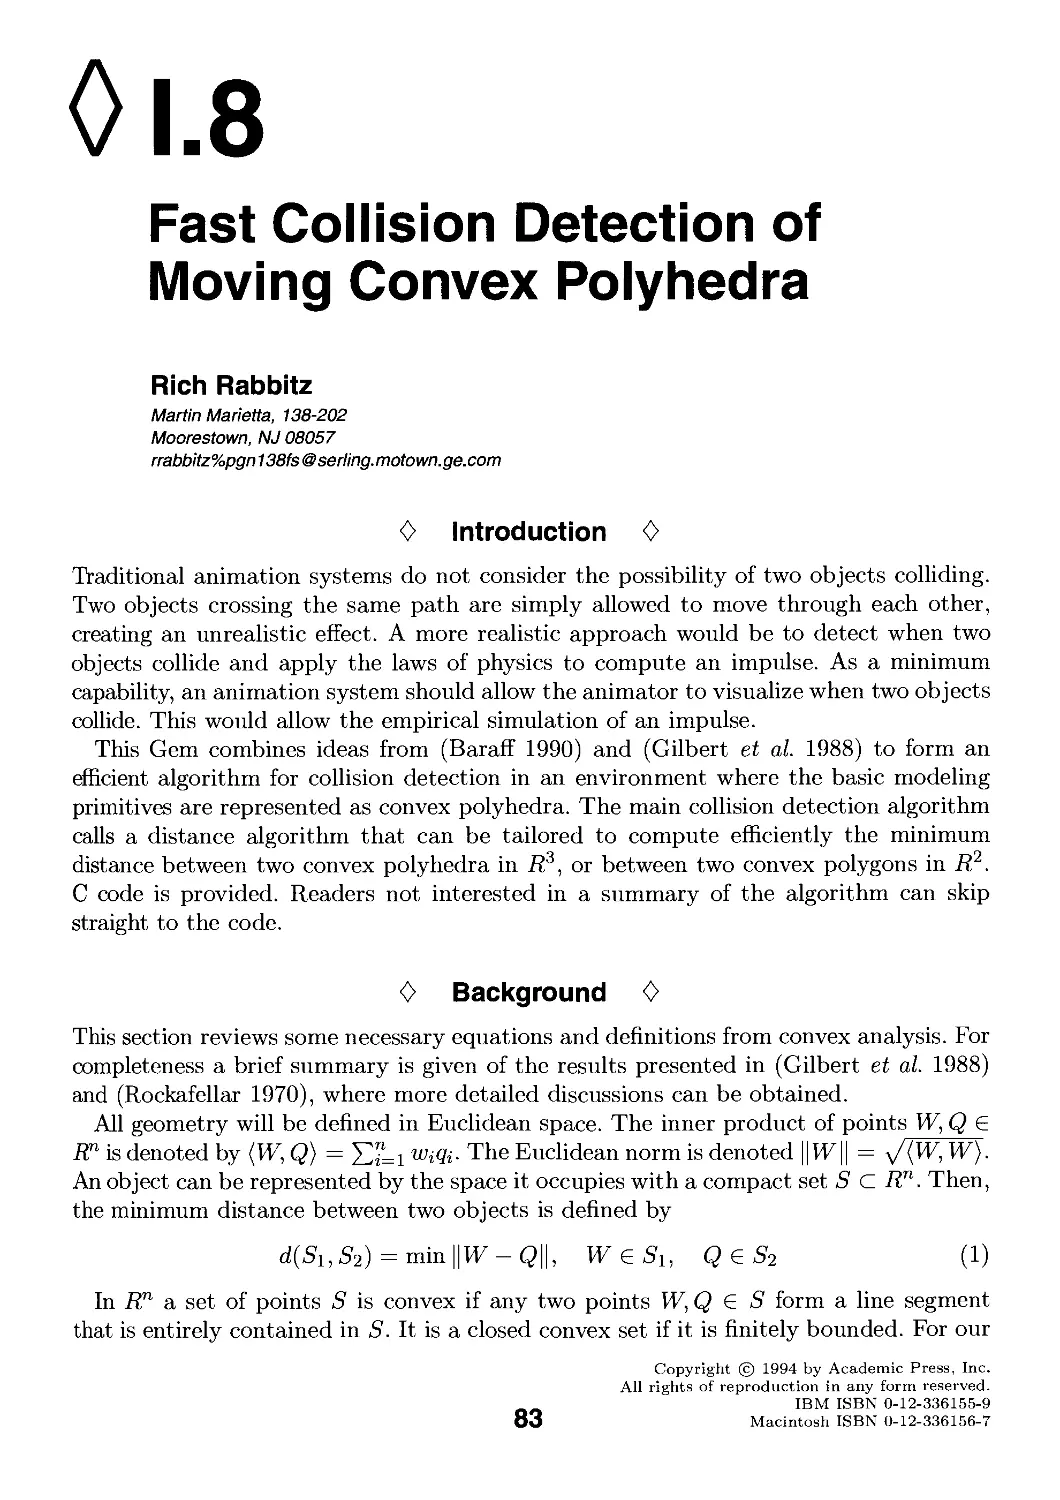 I.8. Fast Collision Detection of Moving Convex Polyhedra by Rich Rabbitz